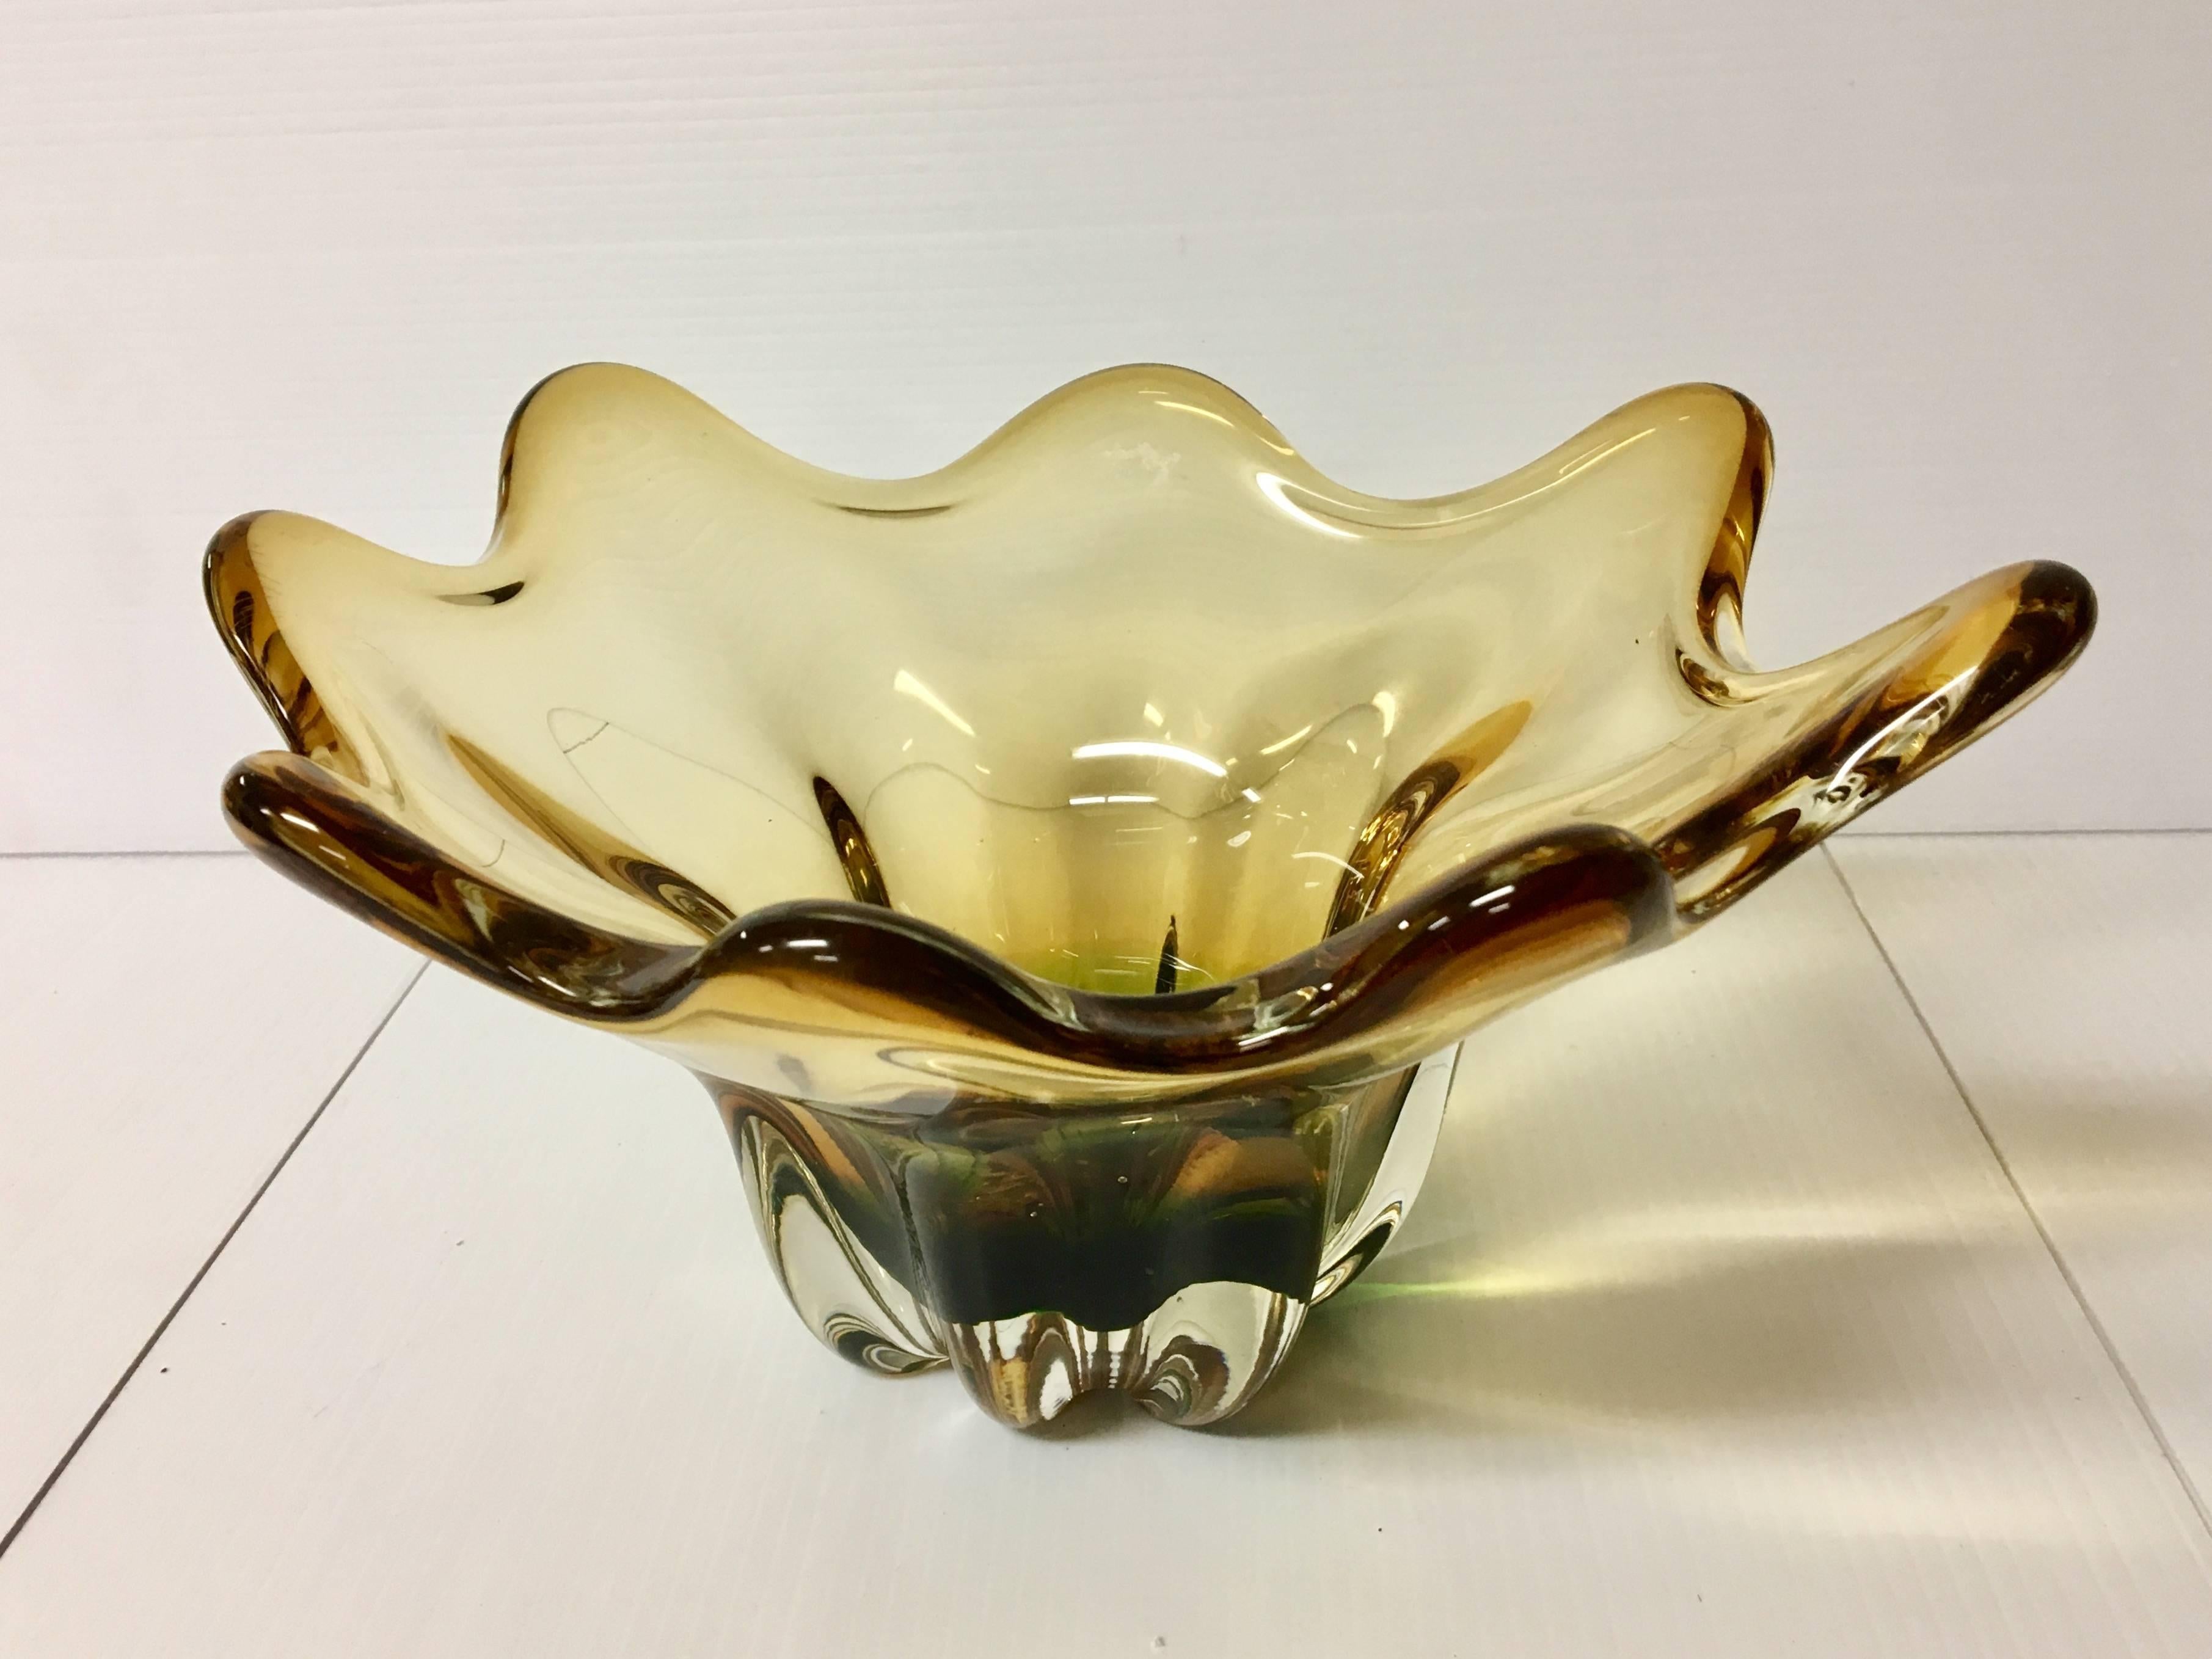 Beautiful free-form candy bowl dish in green and gold Murano glass, circa 1950s. Excellent condition no chips or cracks.